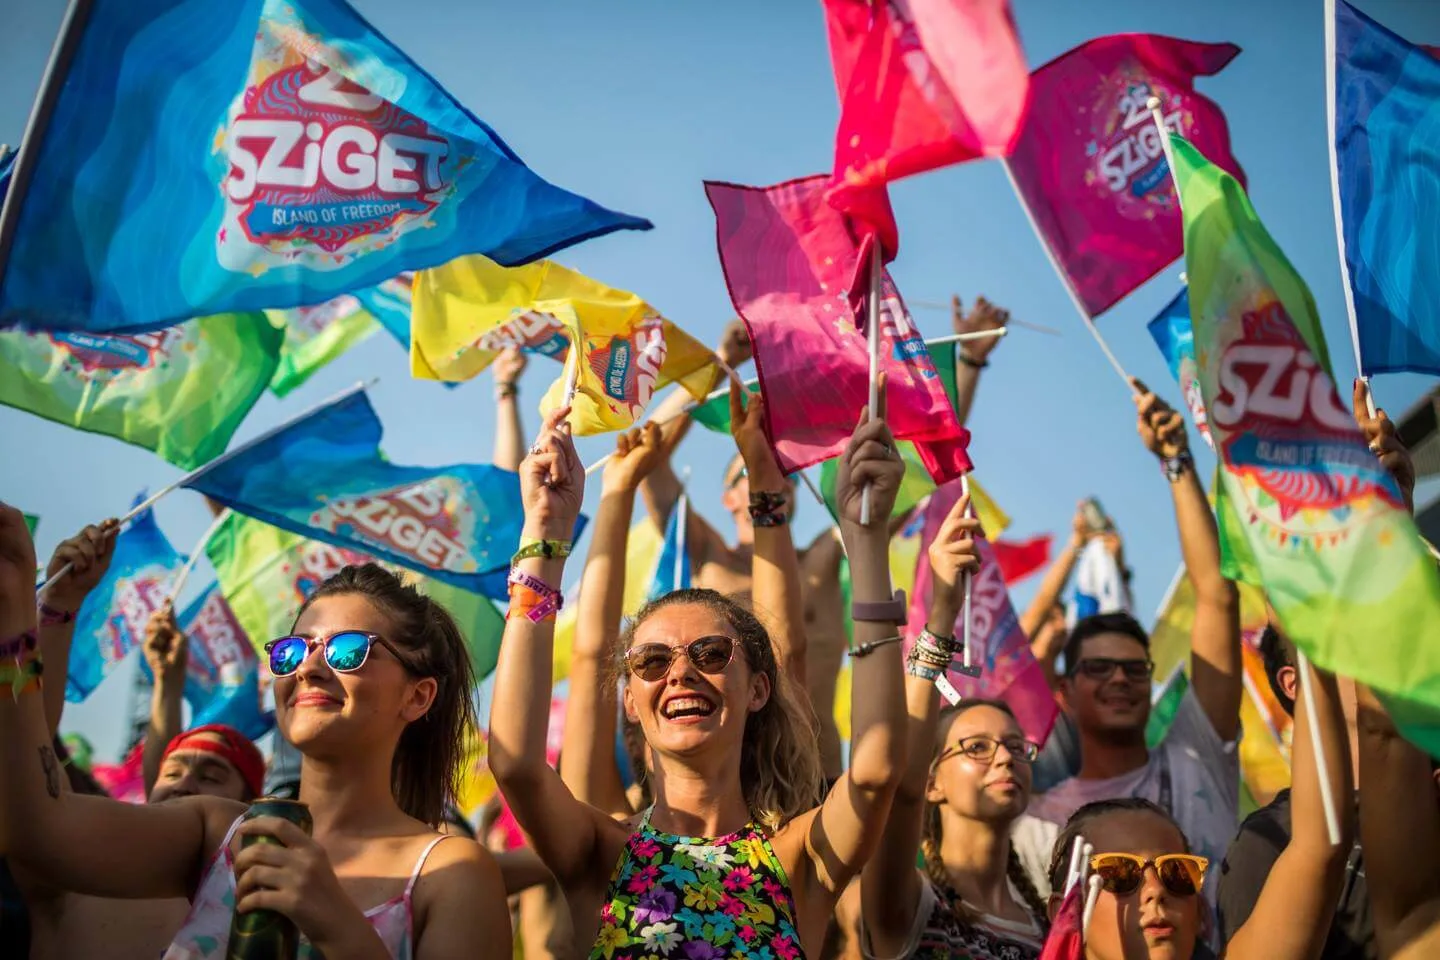 My Review of Sziget Festival in Budapest